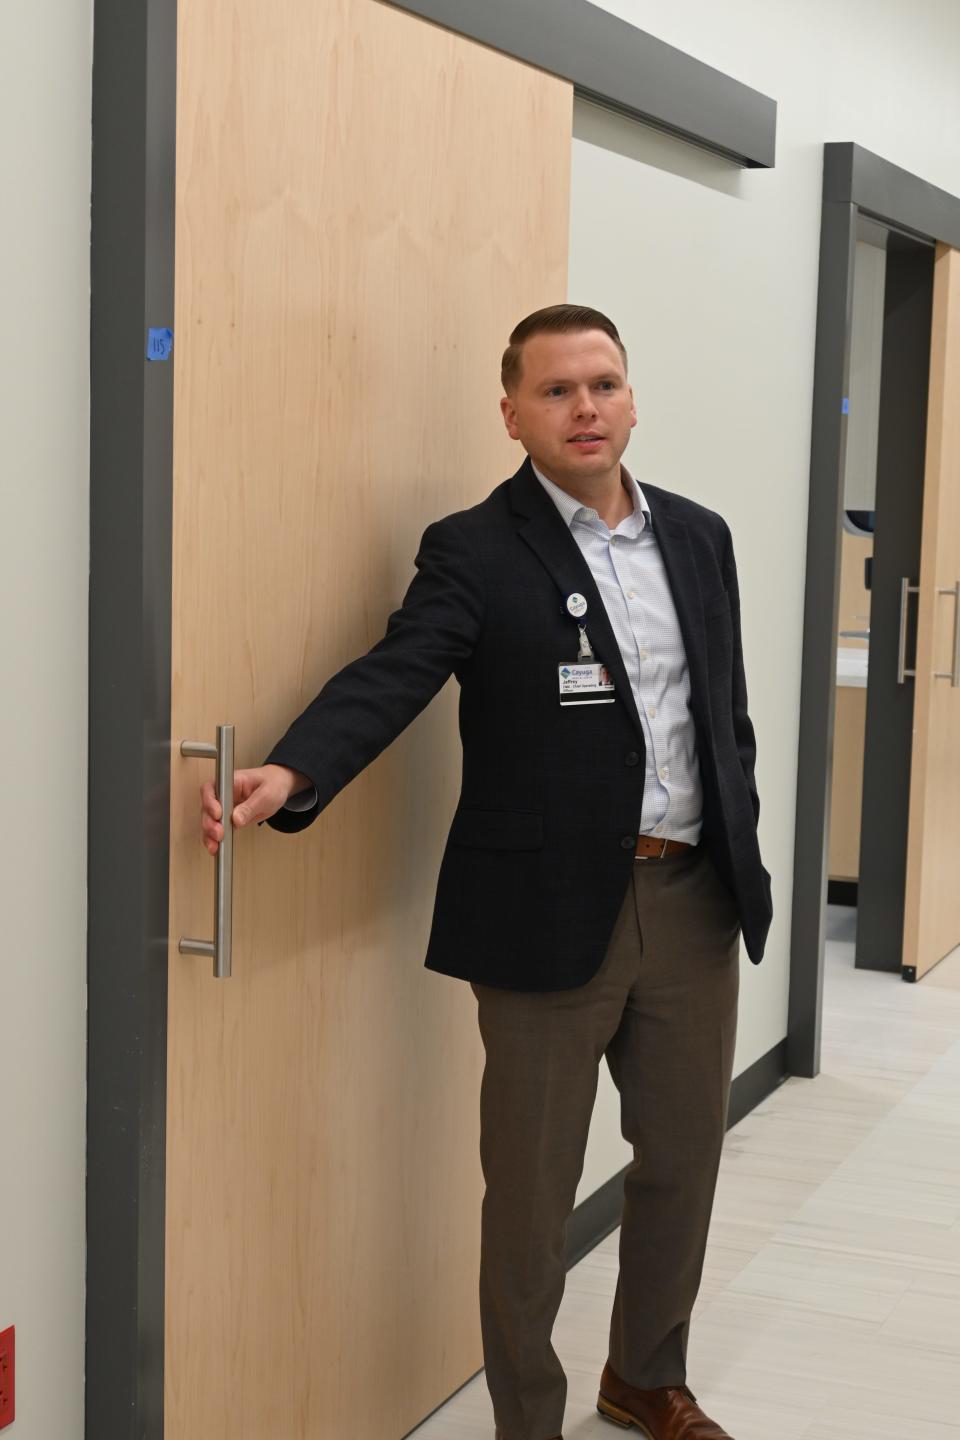 Jeffrey Penoyer, chief operating officer of Cayuga Medical Associates, opens the door to a patient screening room at the Cayuga Park Medical Building .